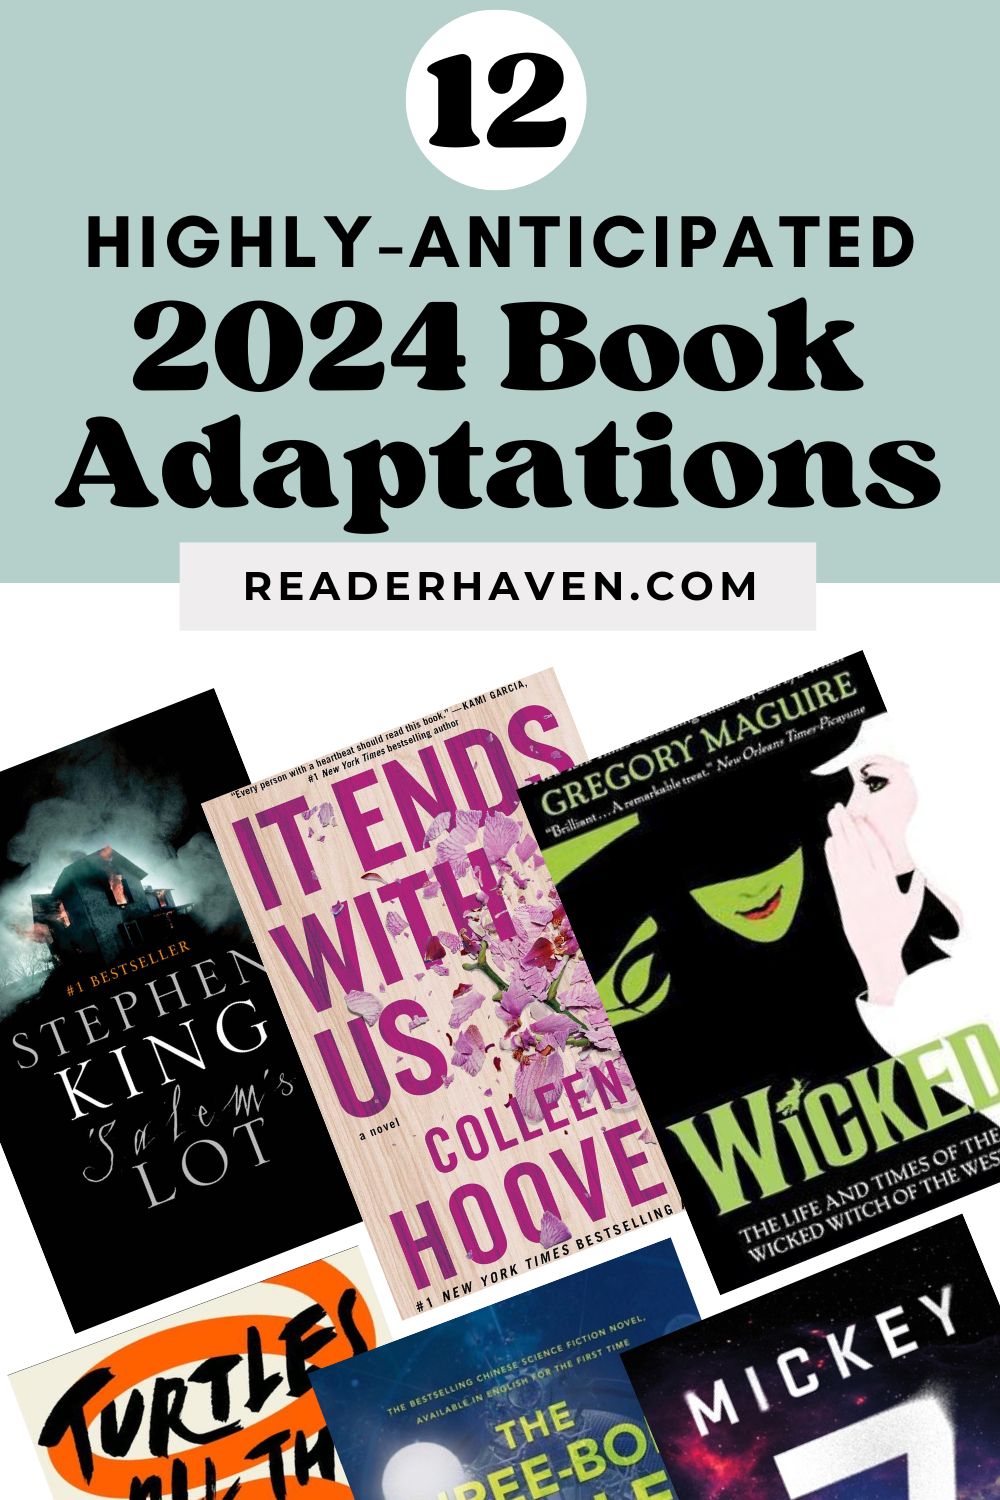 book covers for TV shows and movies based on books in 2024